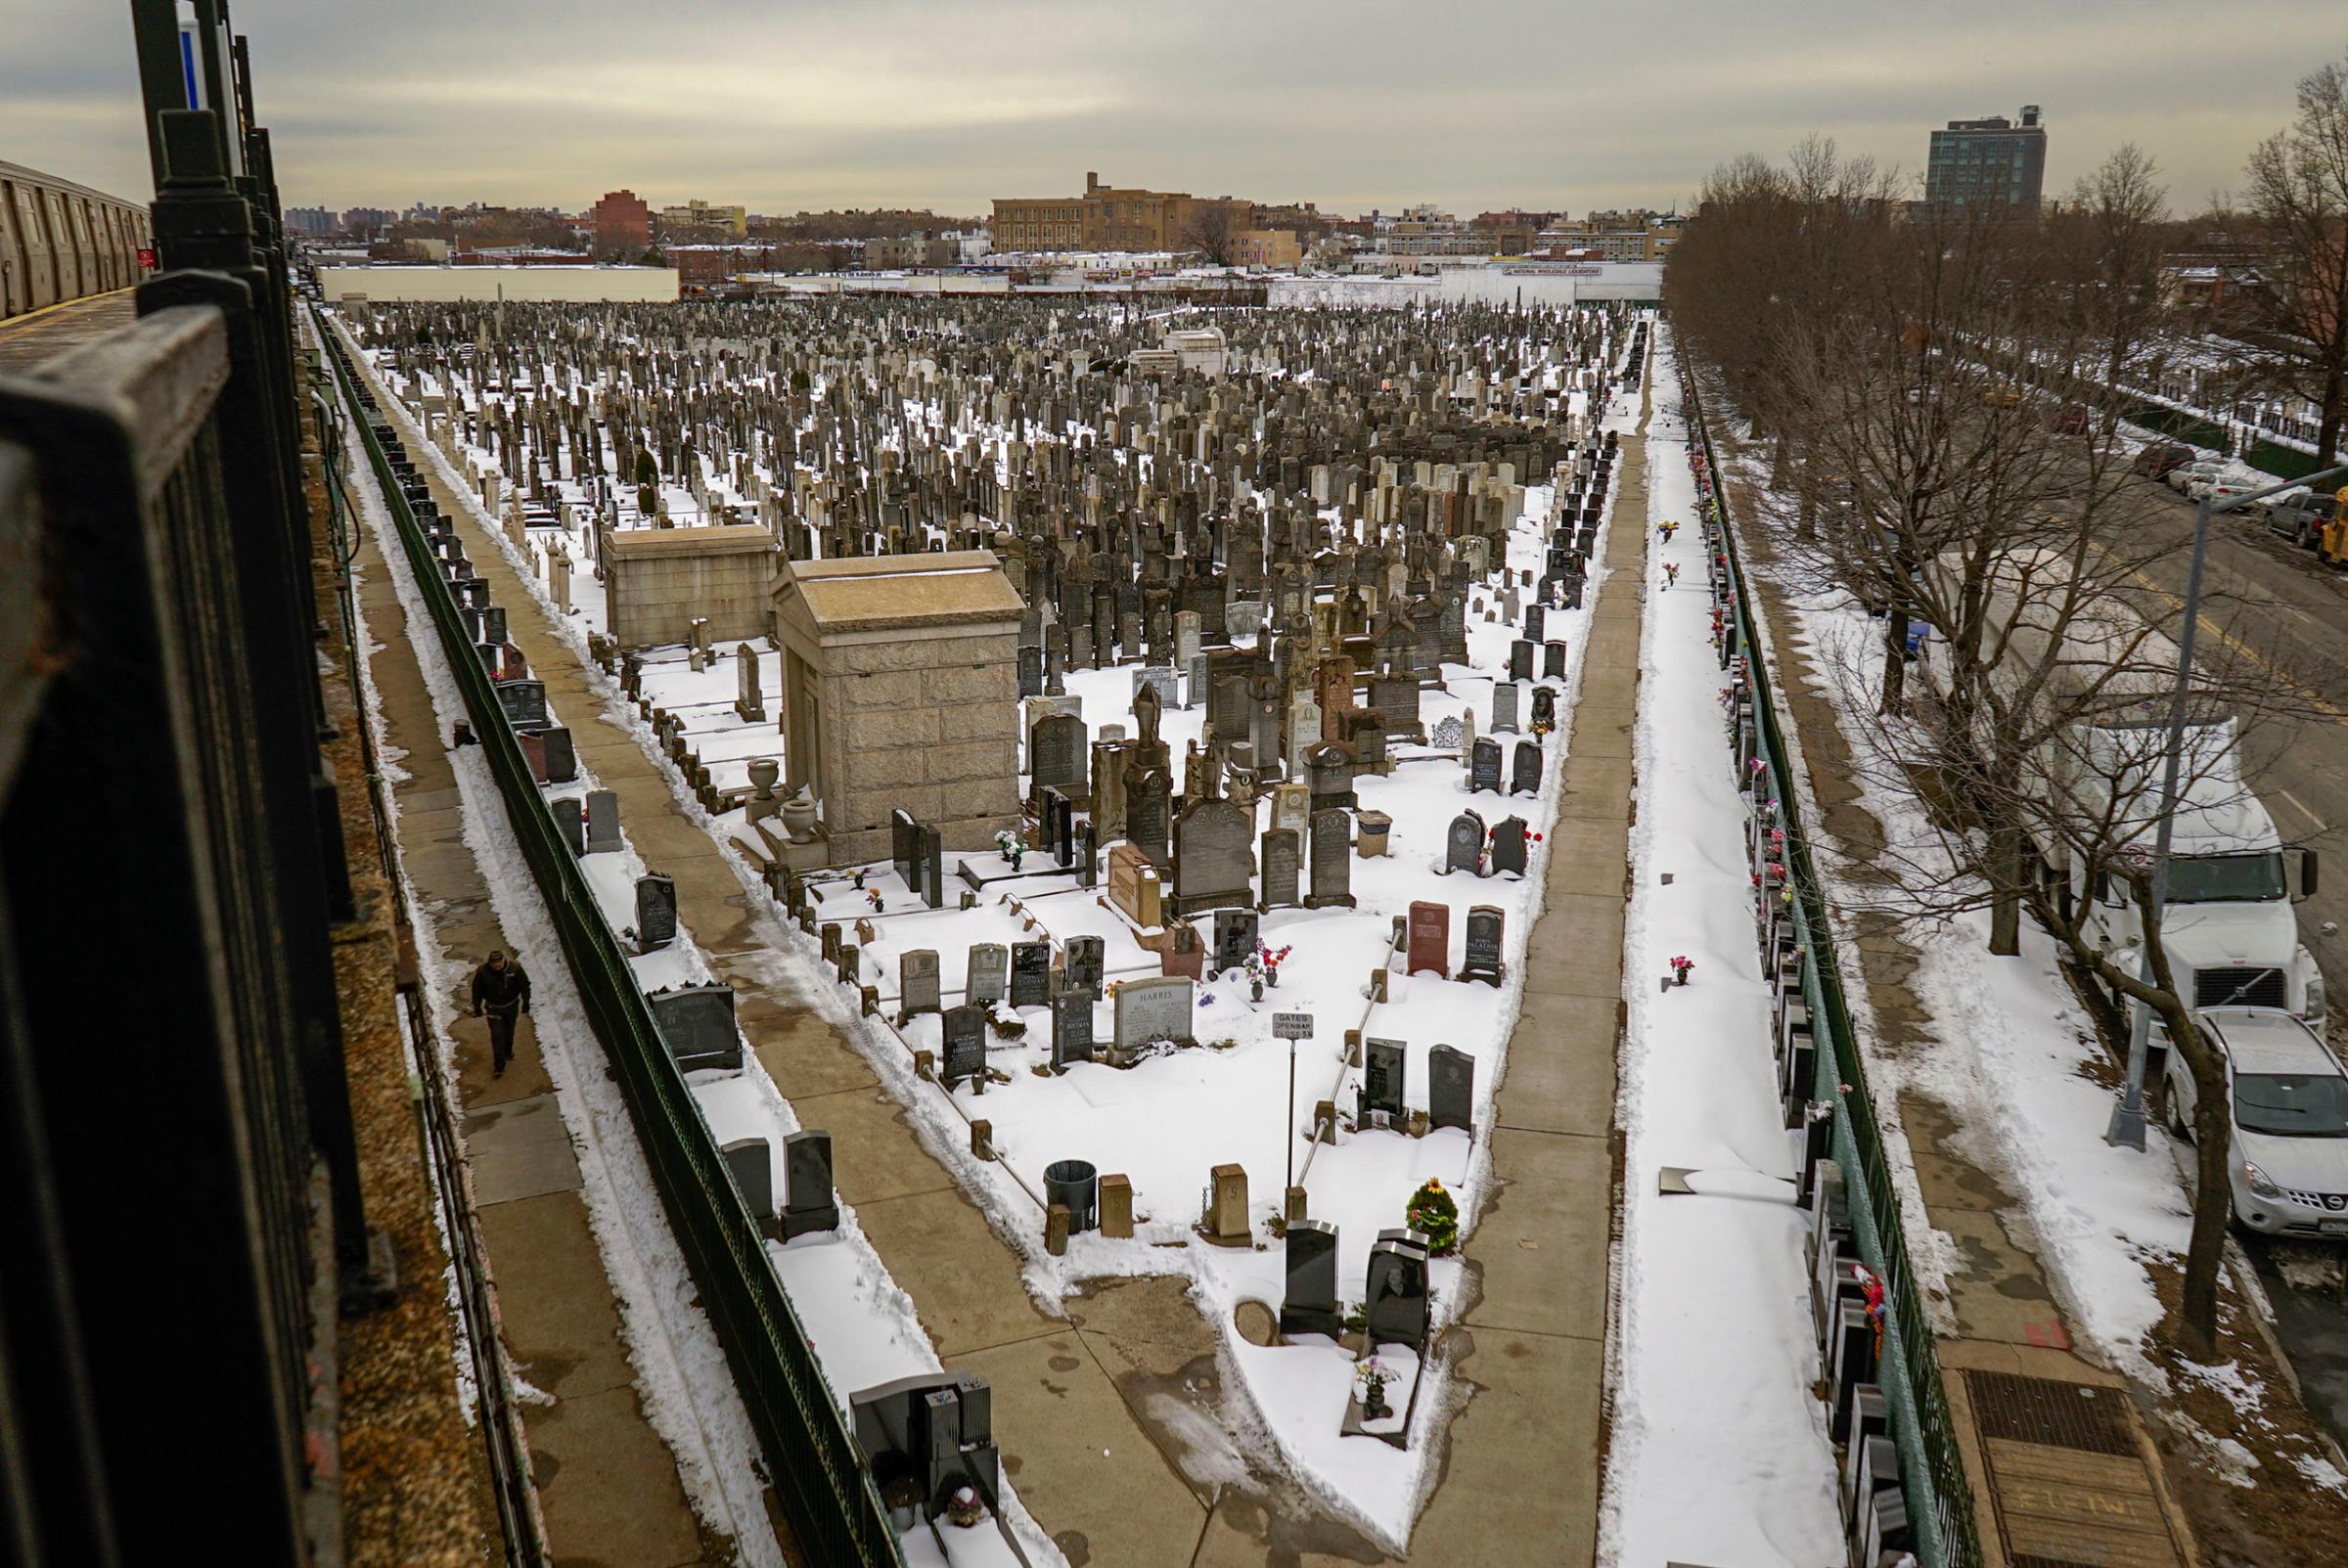 USA. Brooklyn, New York. 2015. Washington Cemetery, a predominantly Jewish burial ground and the densest in New York City.